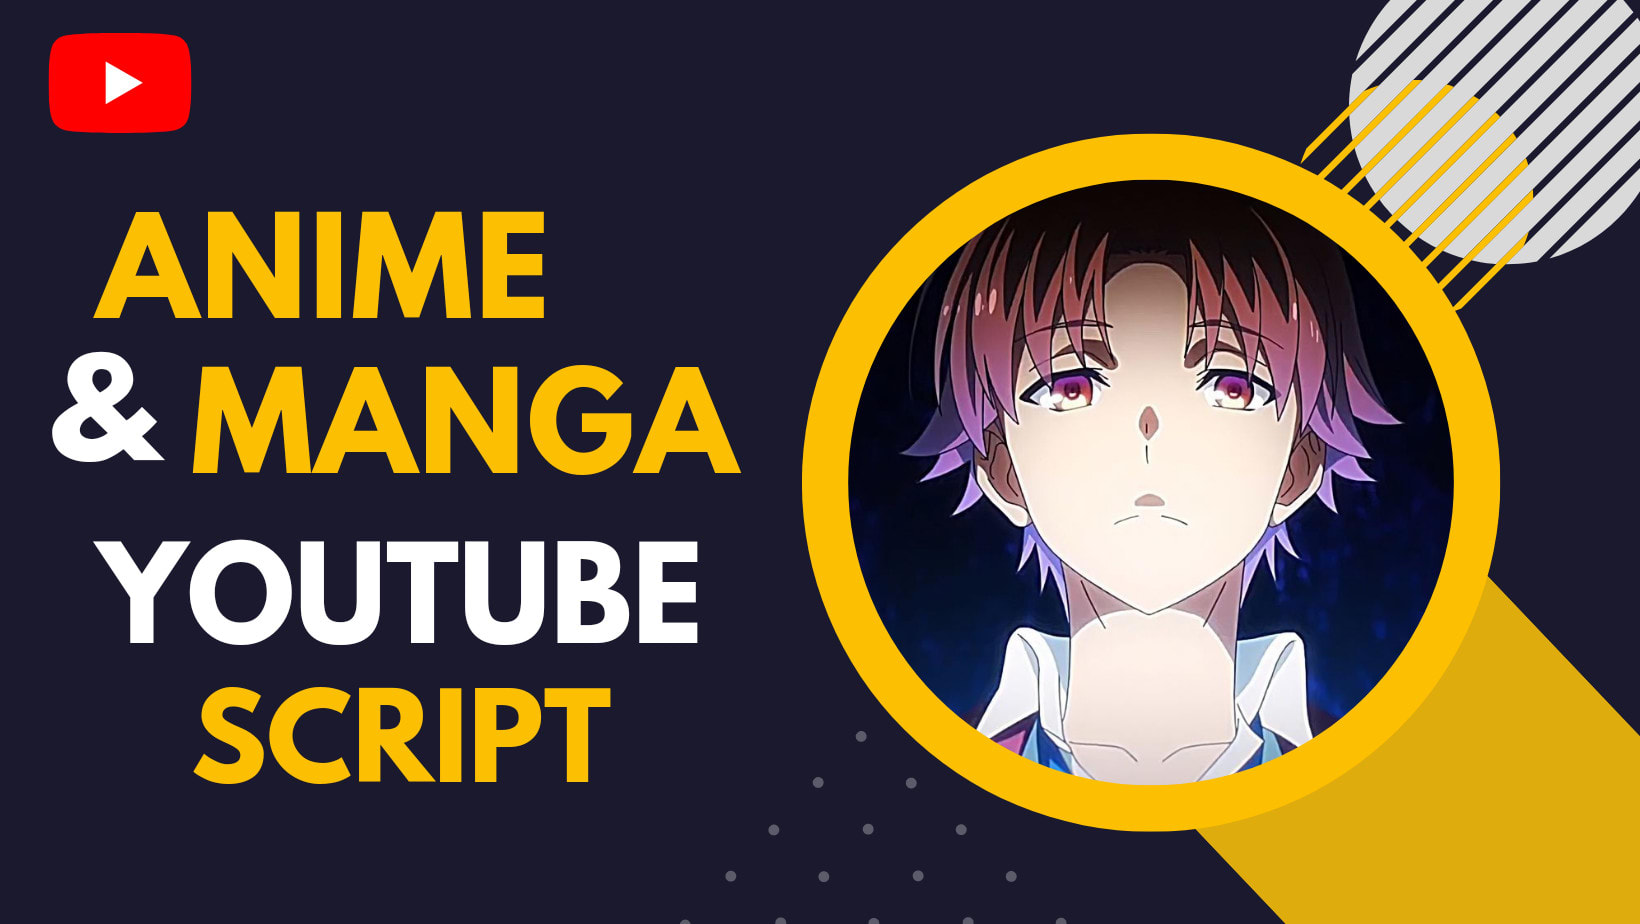 An engaging Anime Recap Video for Your  with Script and